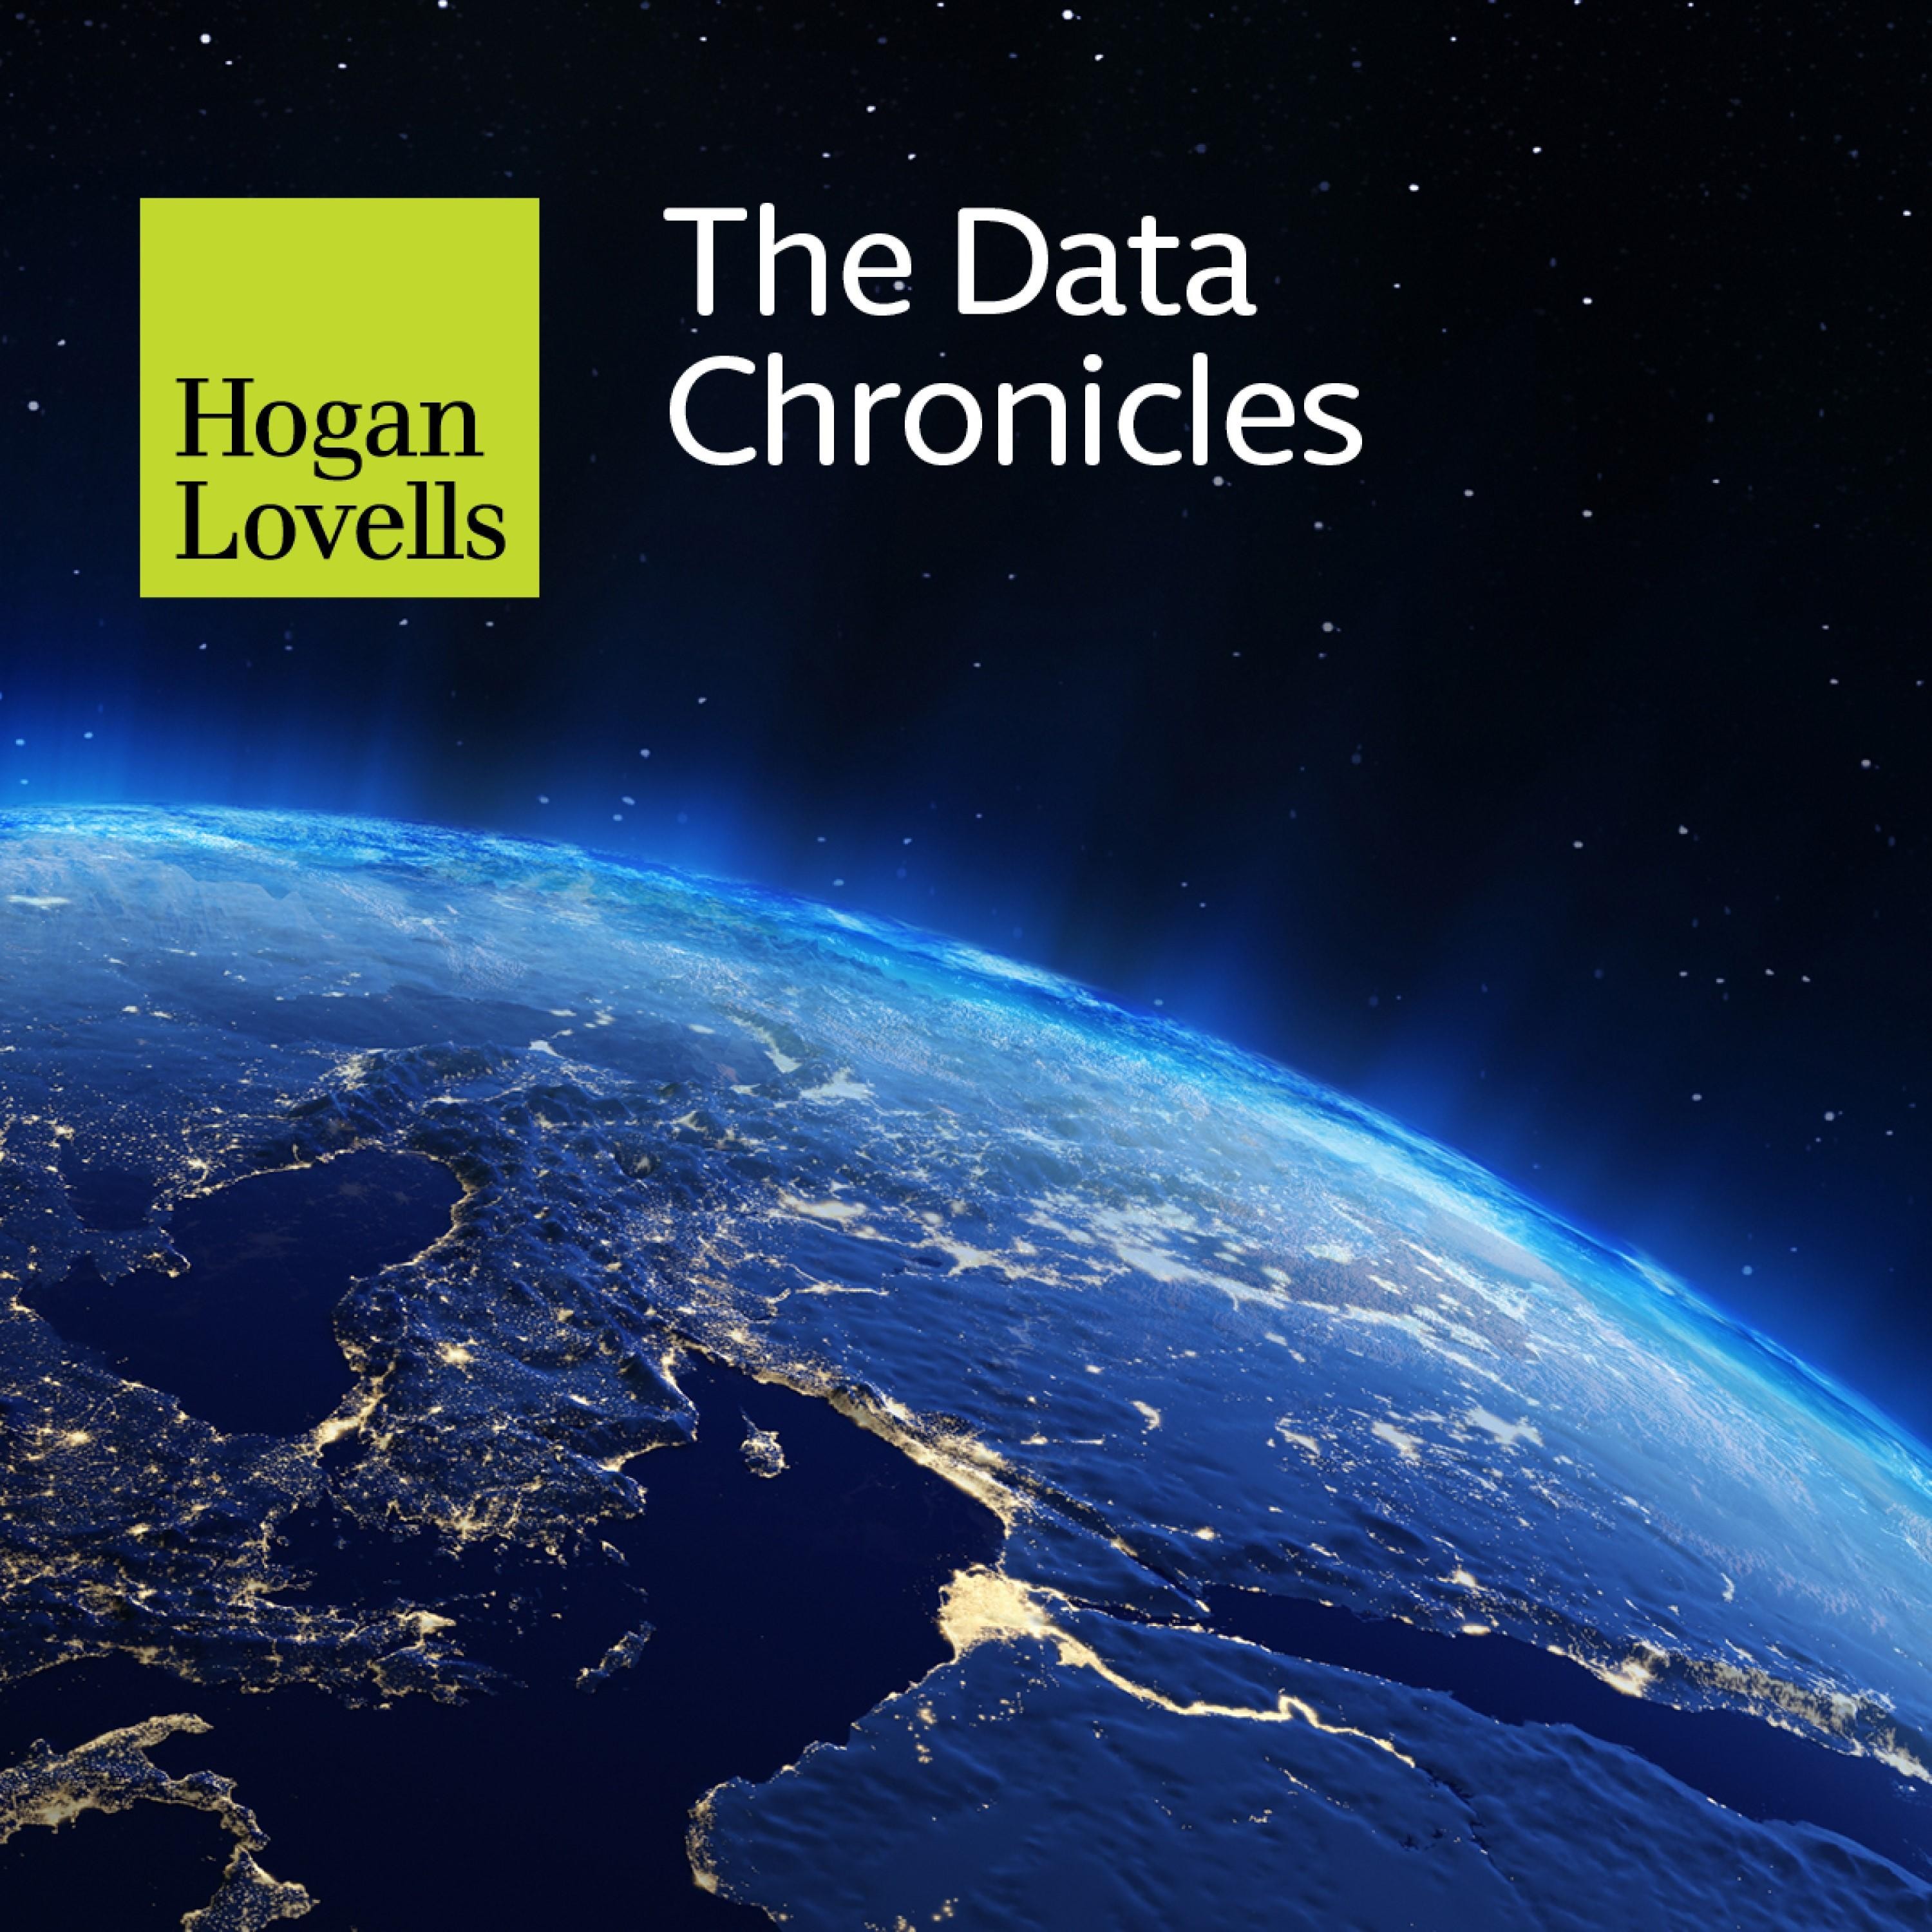 The Data Chronicles